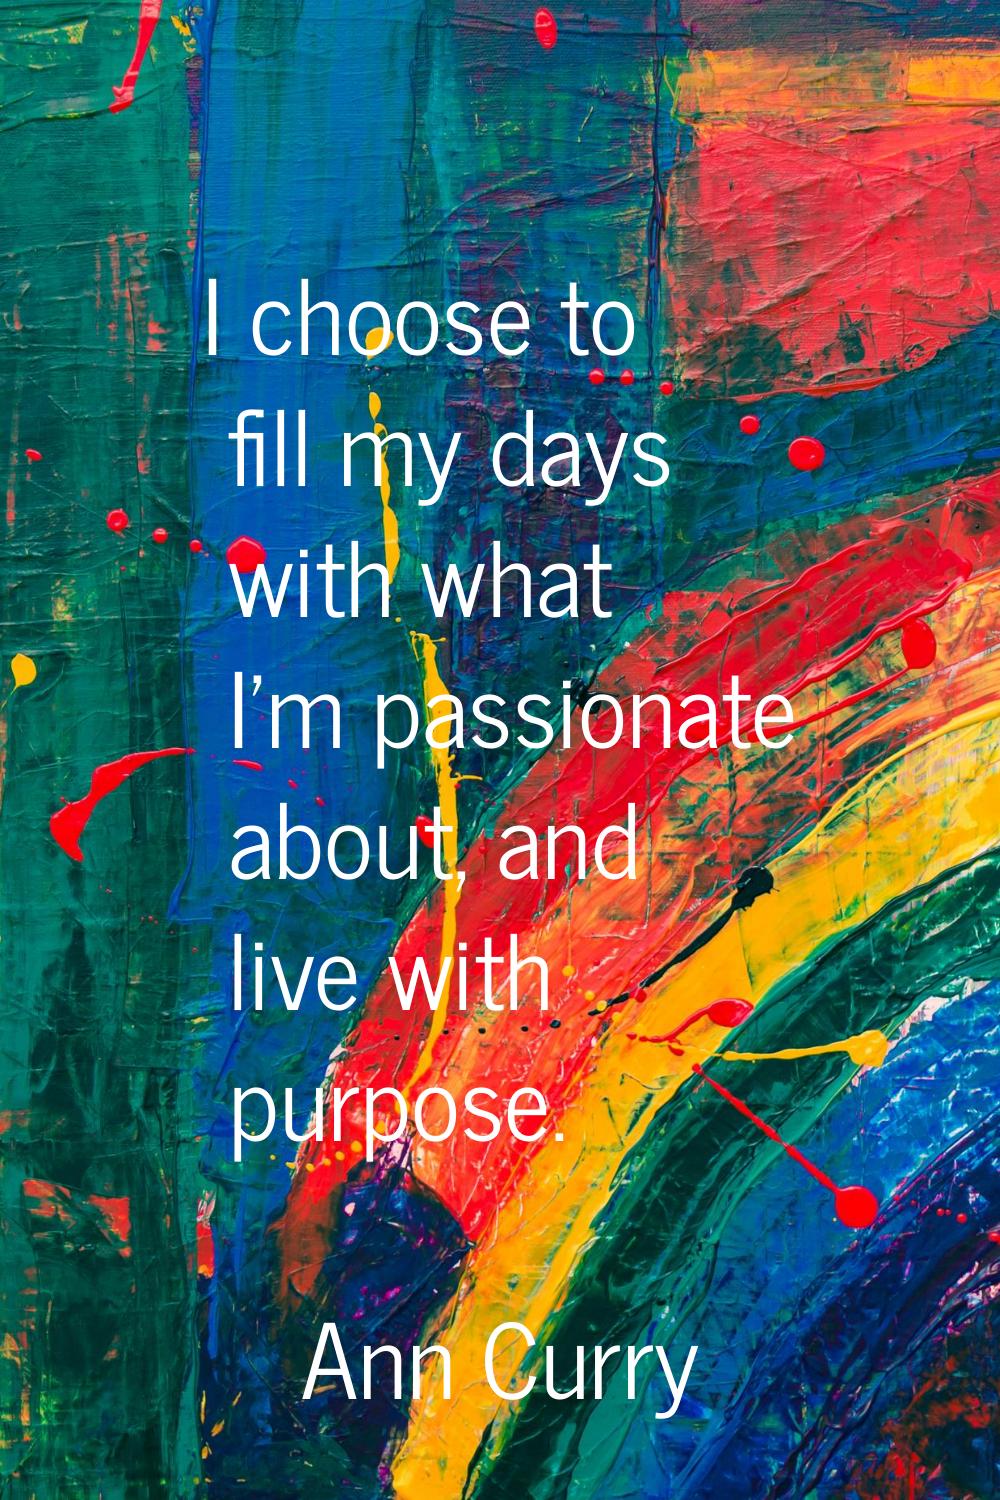 I choose to fill my days with what I'm passionate about, and live with purpose.